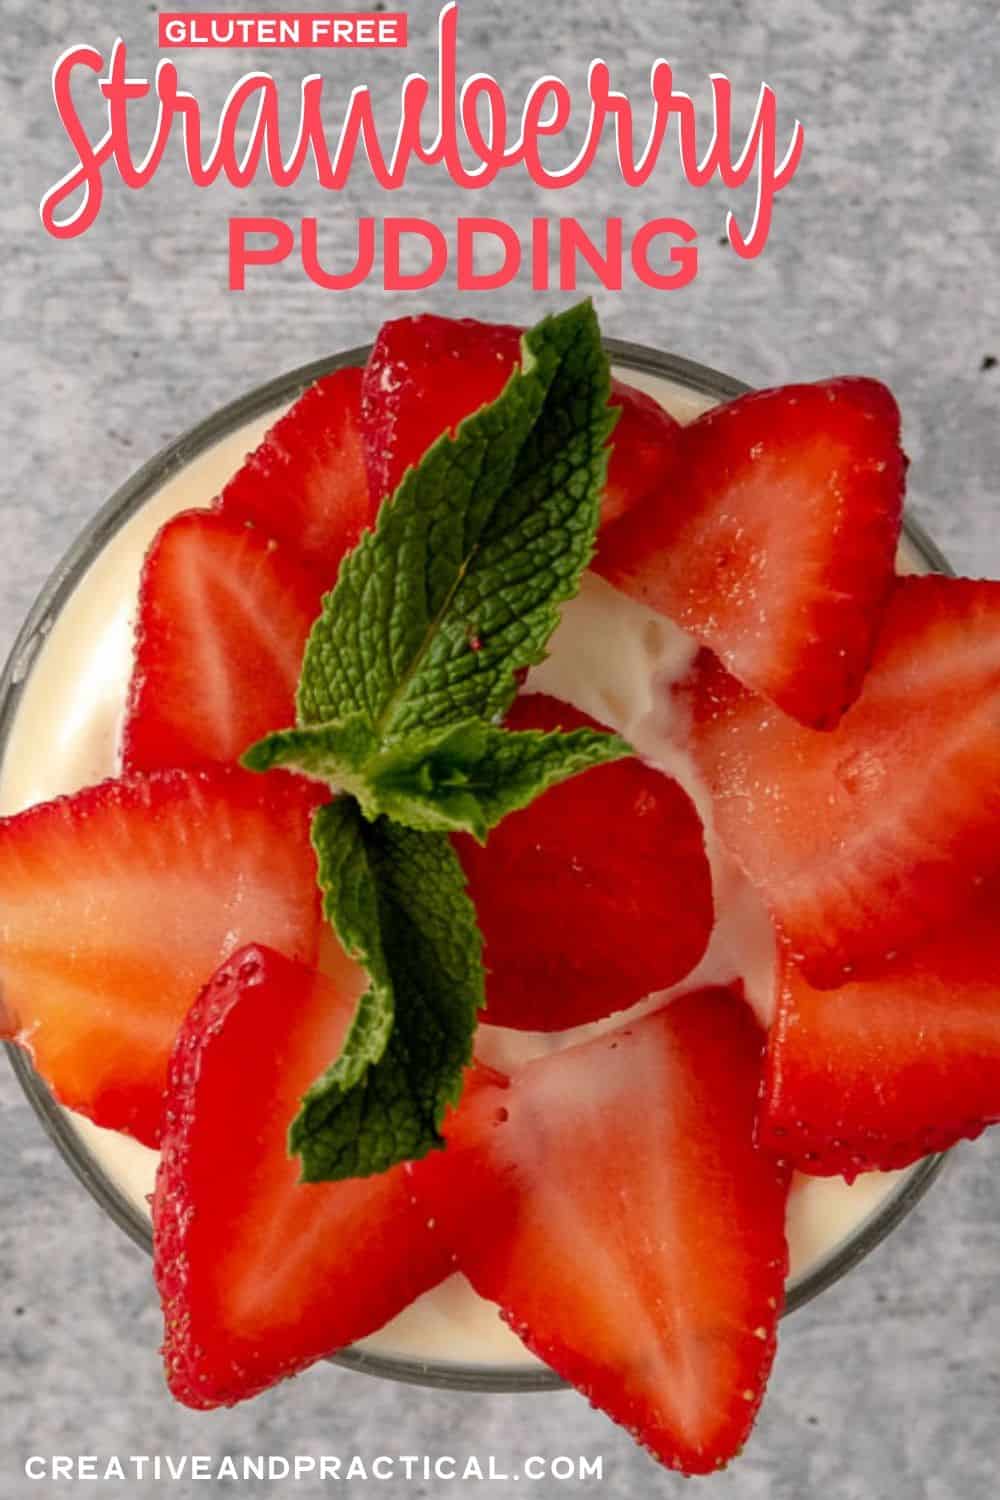 Creamy Strawberry Pudding - Creamy Strawberry Pudding - yummy gluten-free vanilla pudding with fresh whipped cream and sliced strawberries. Simply DELICIOUS! #glutenfree #instant #easydessert #nobake #jello #jellorecipe #pudding ➤ cheerfulcook.com via @cheerfulcook